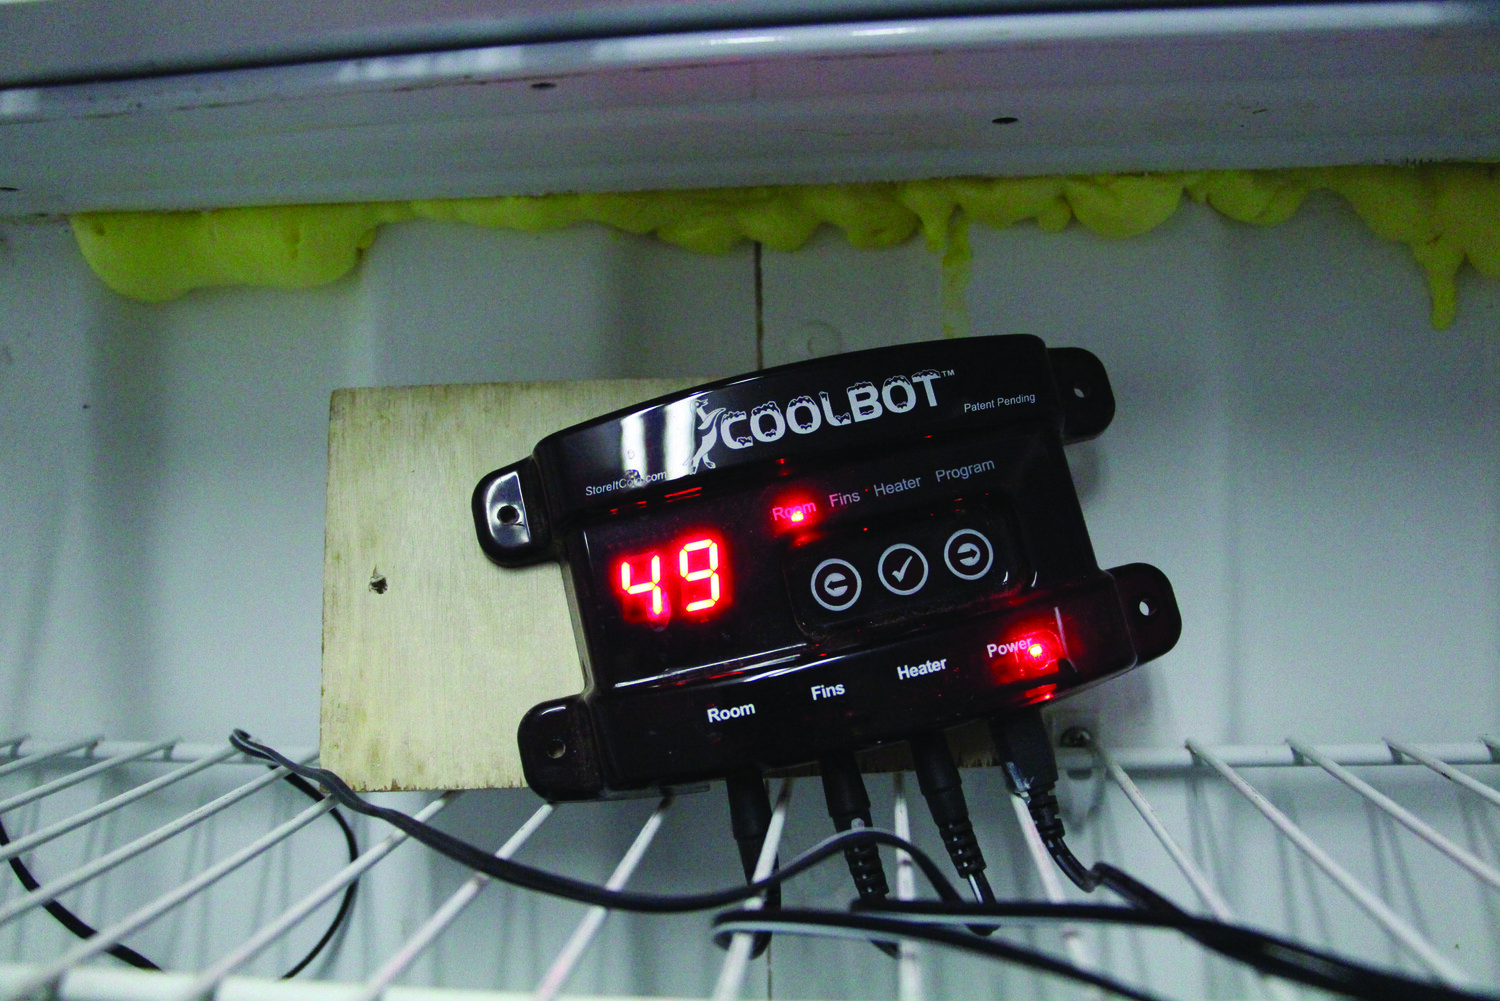 The coolbot interface, while small, can make a great impact in the longevity
of ripe produce and the value of crops when farmers take them to the market.